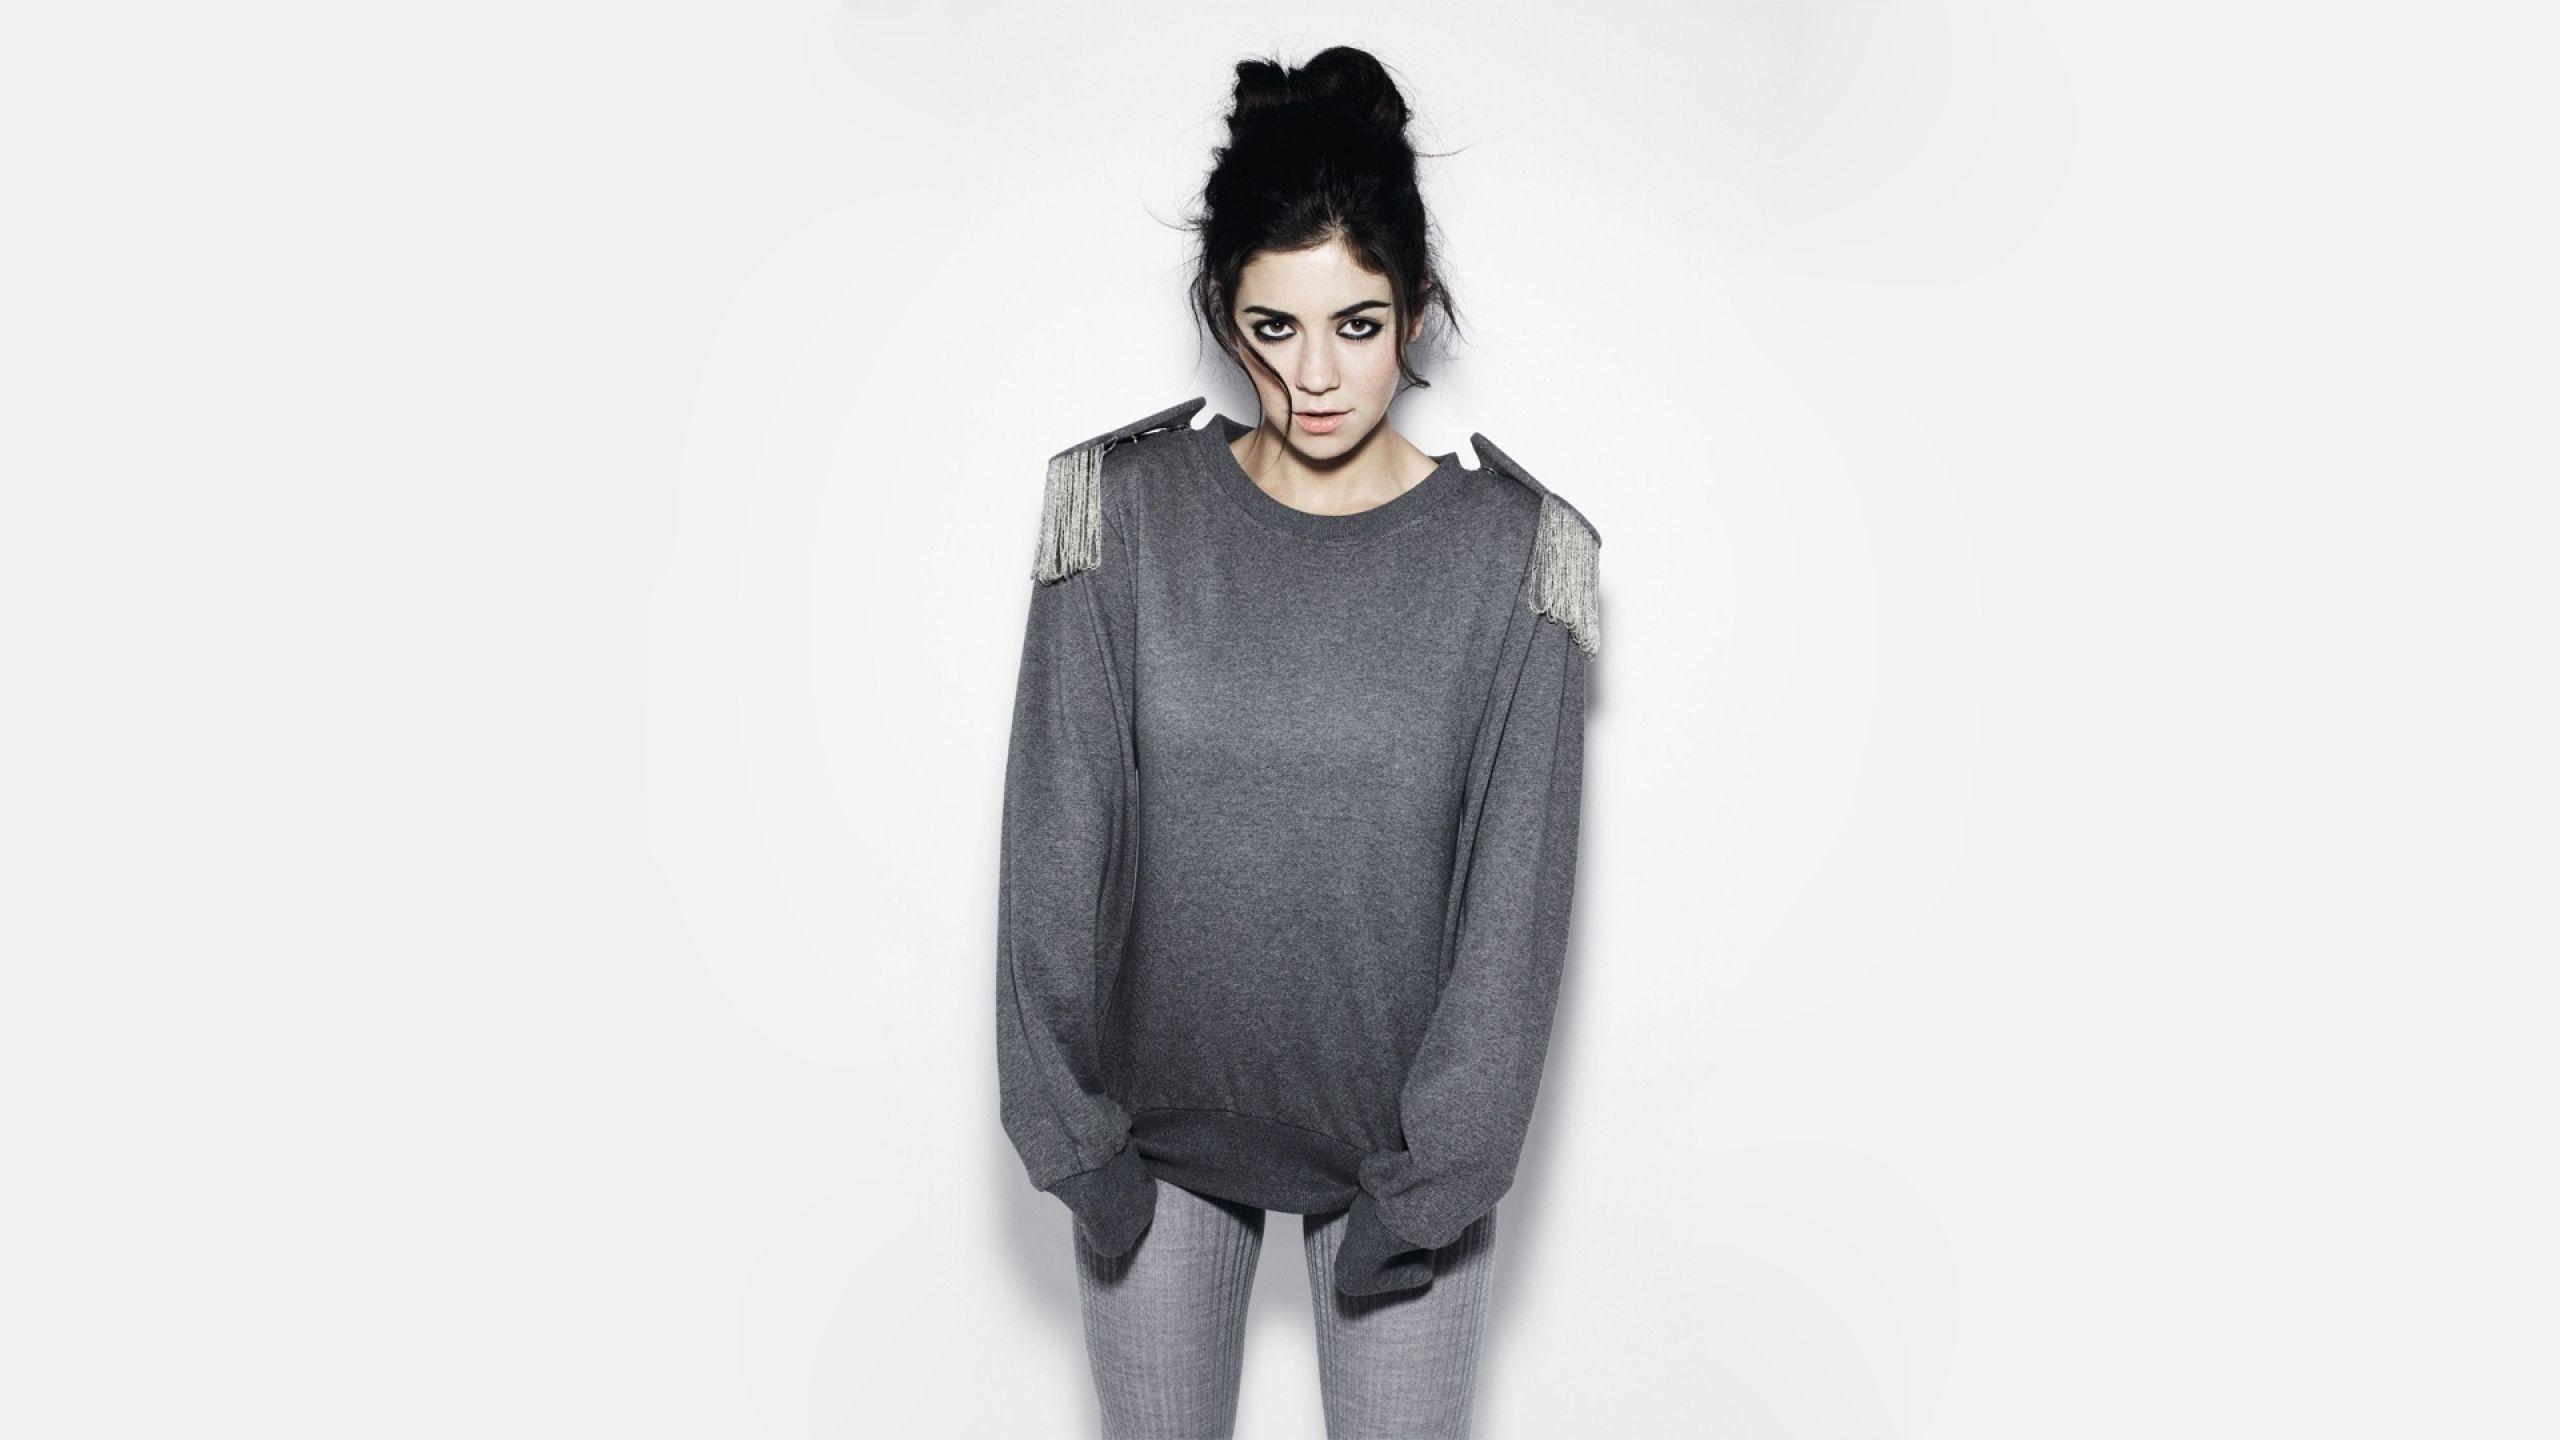 Download Wallpaper, Download 2560x1440 marina and the diamonds